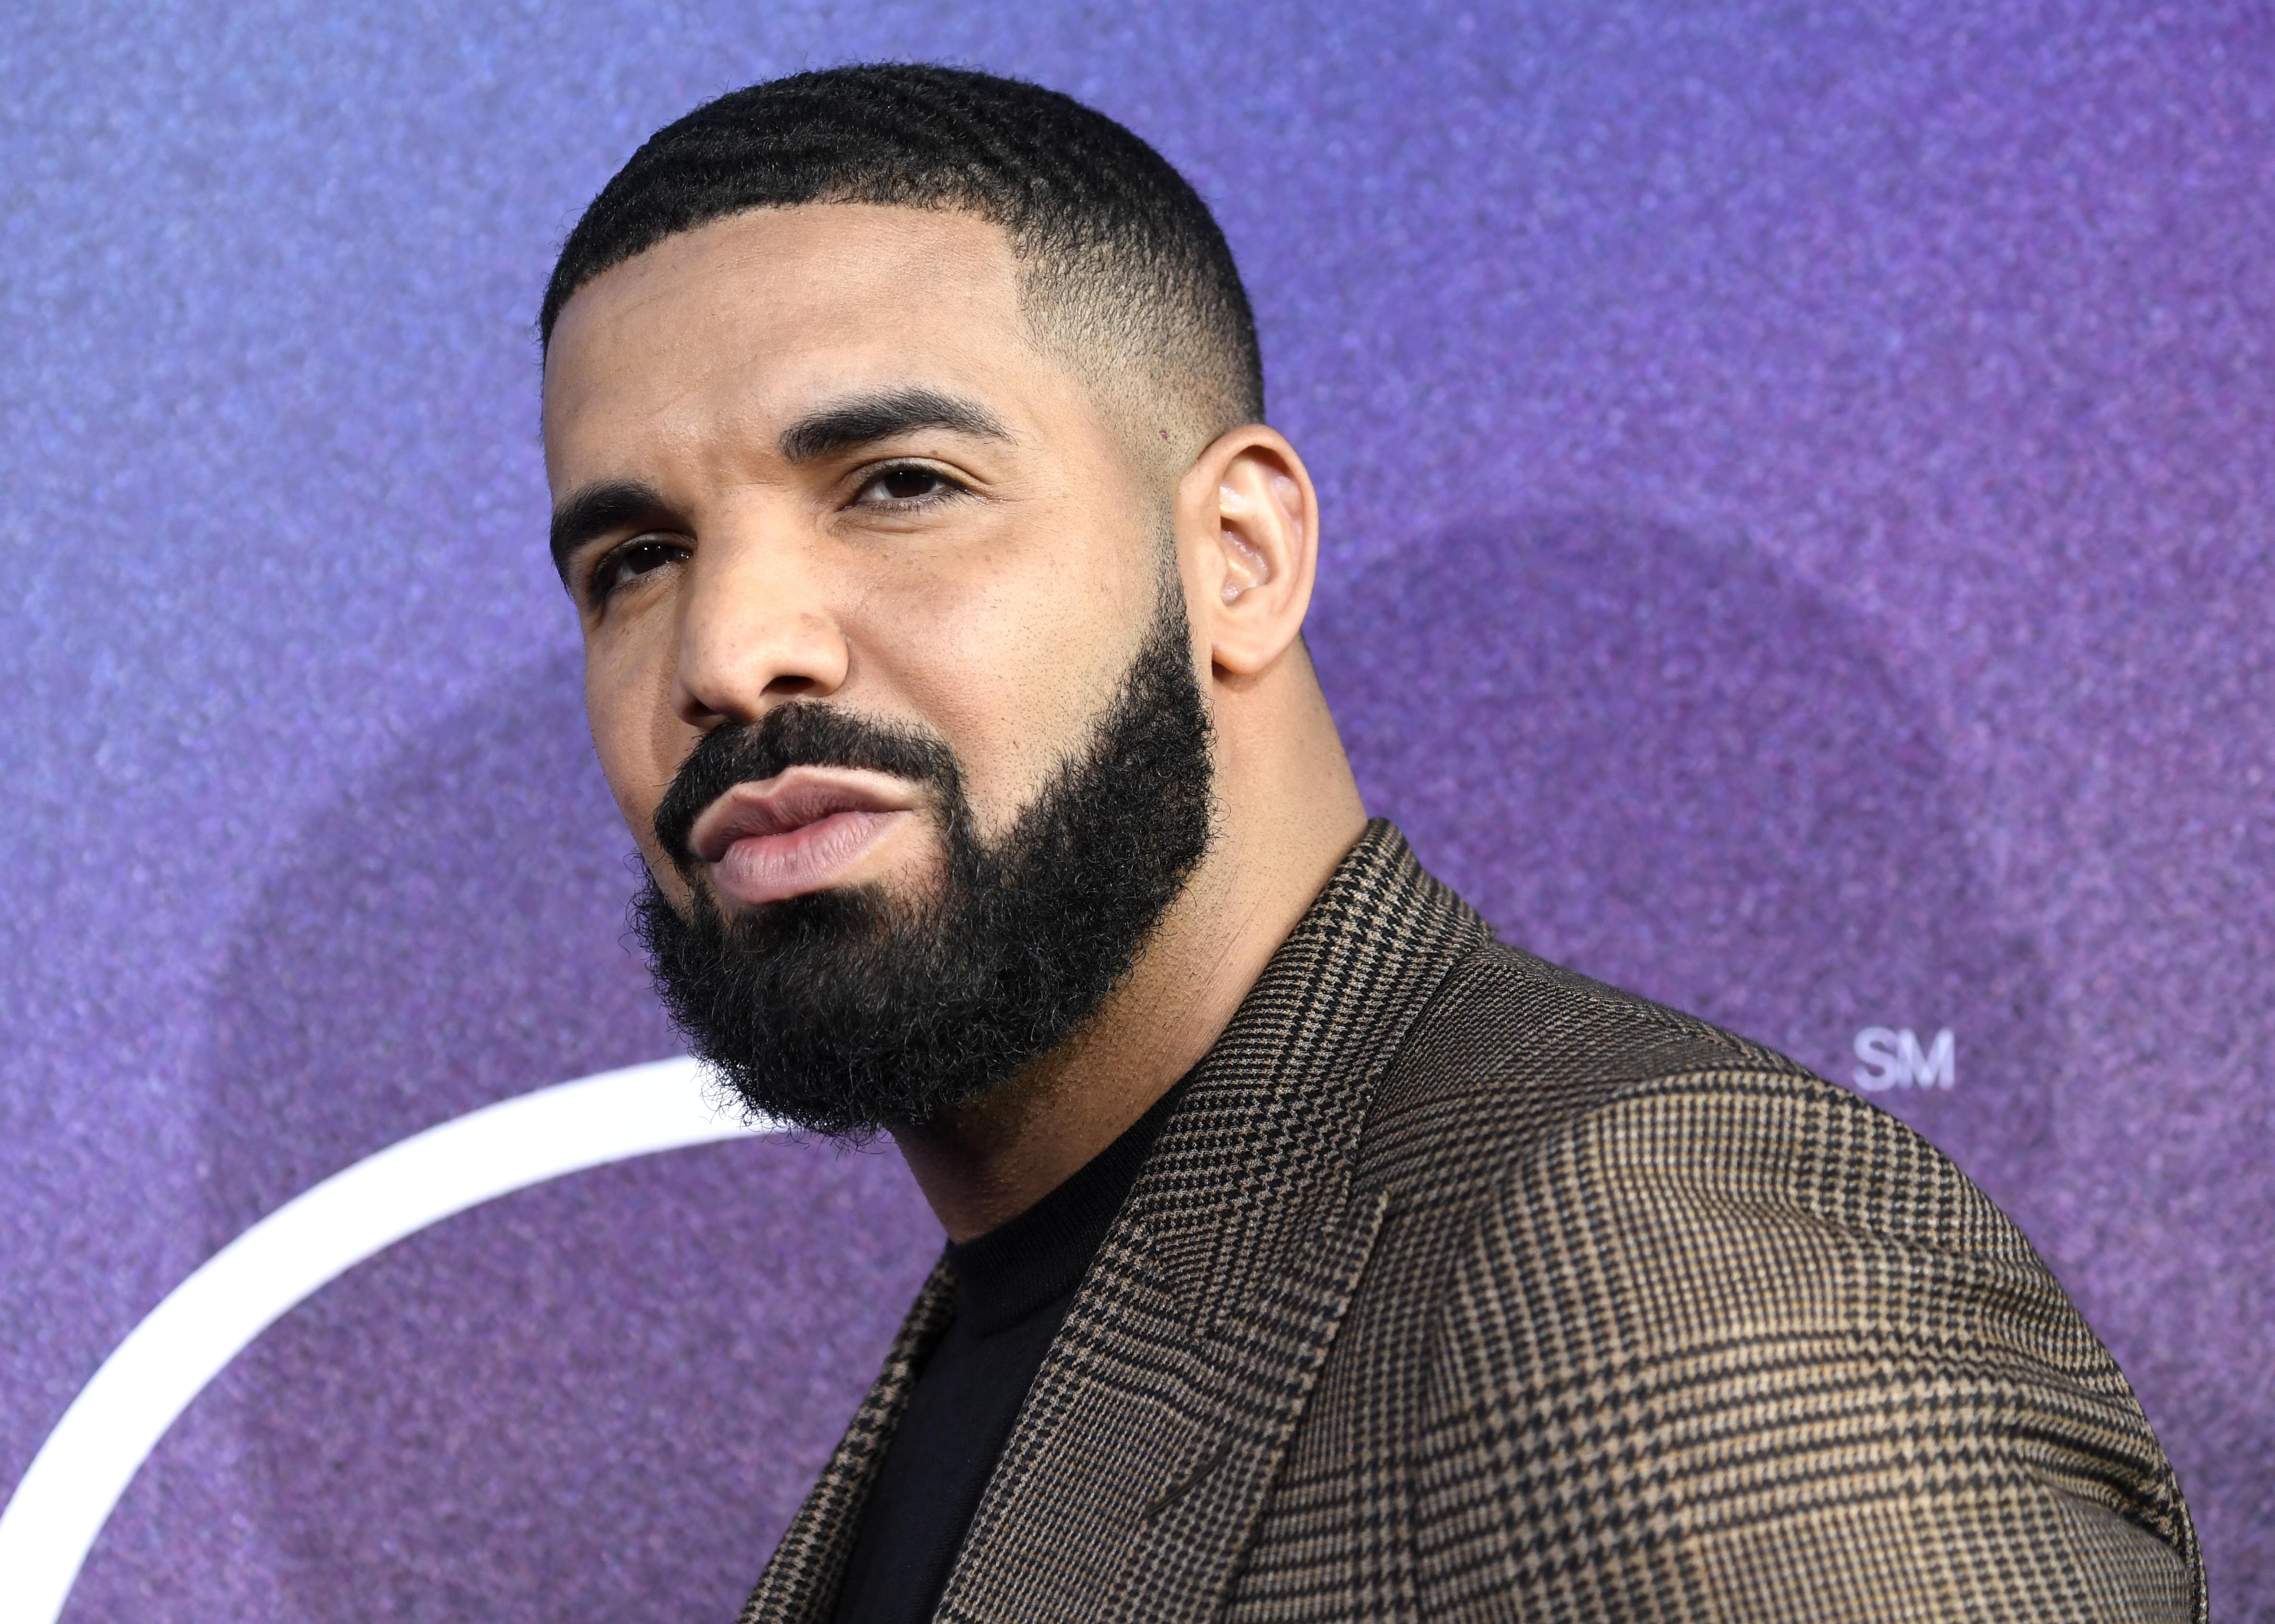 Drake’s ‘Care Package’ Reaches The No. 1 Spot On The Billboard 200 Chart